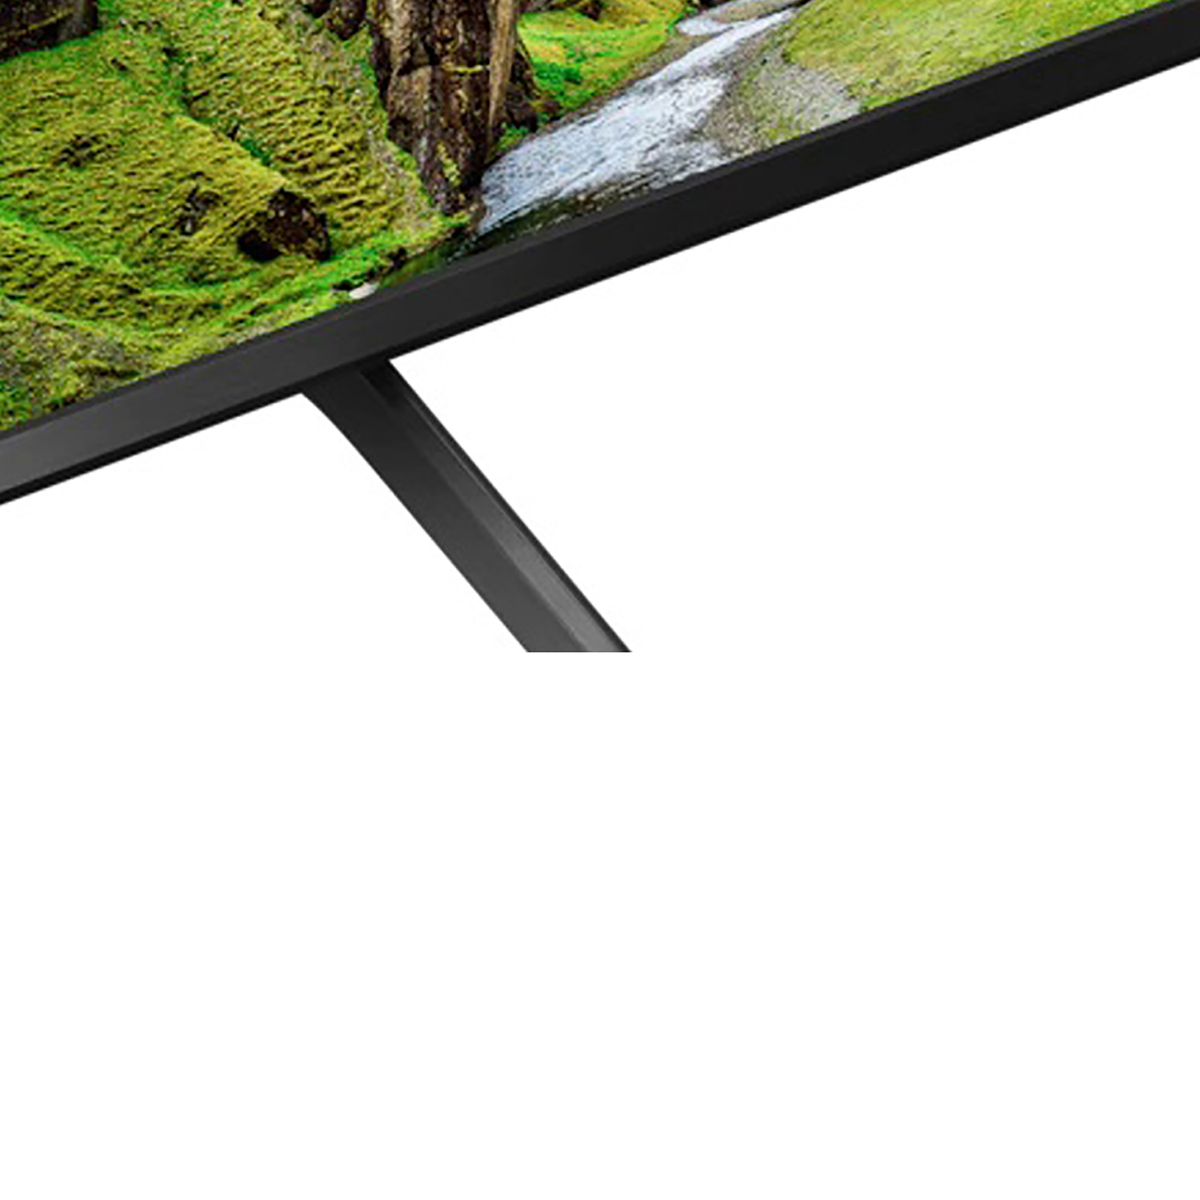 Sony 4K UHD Android Smart LED TV KD-43X75 43 inch